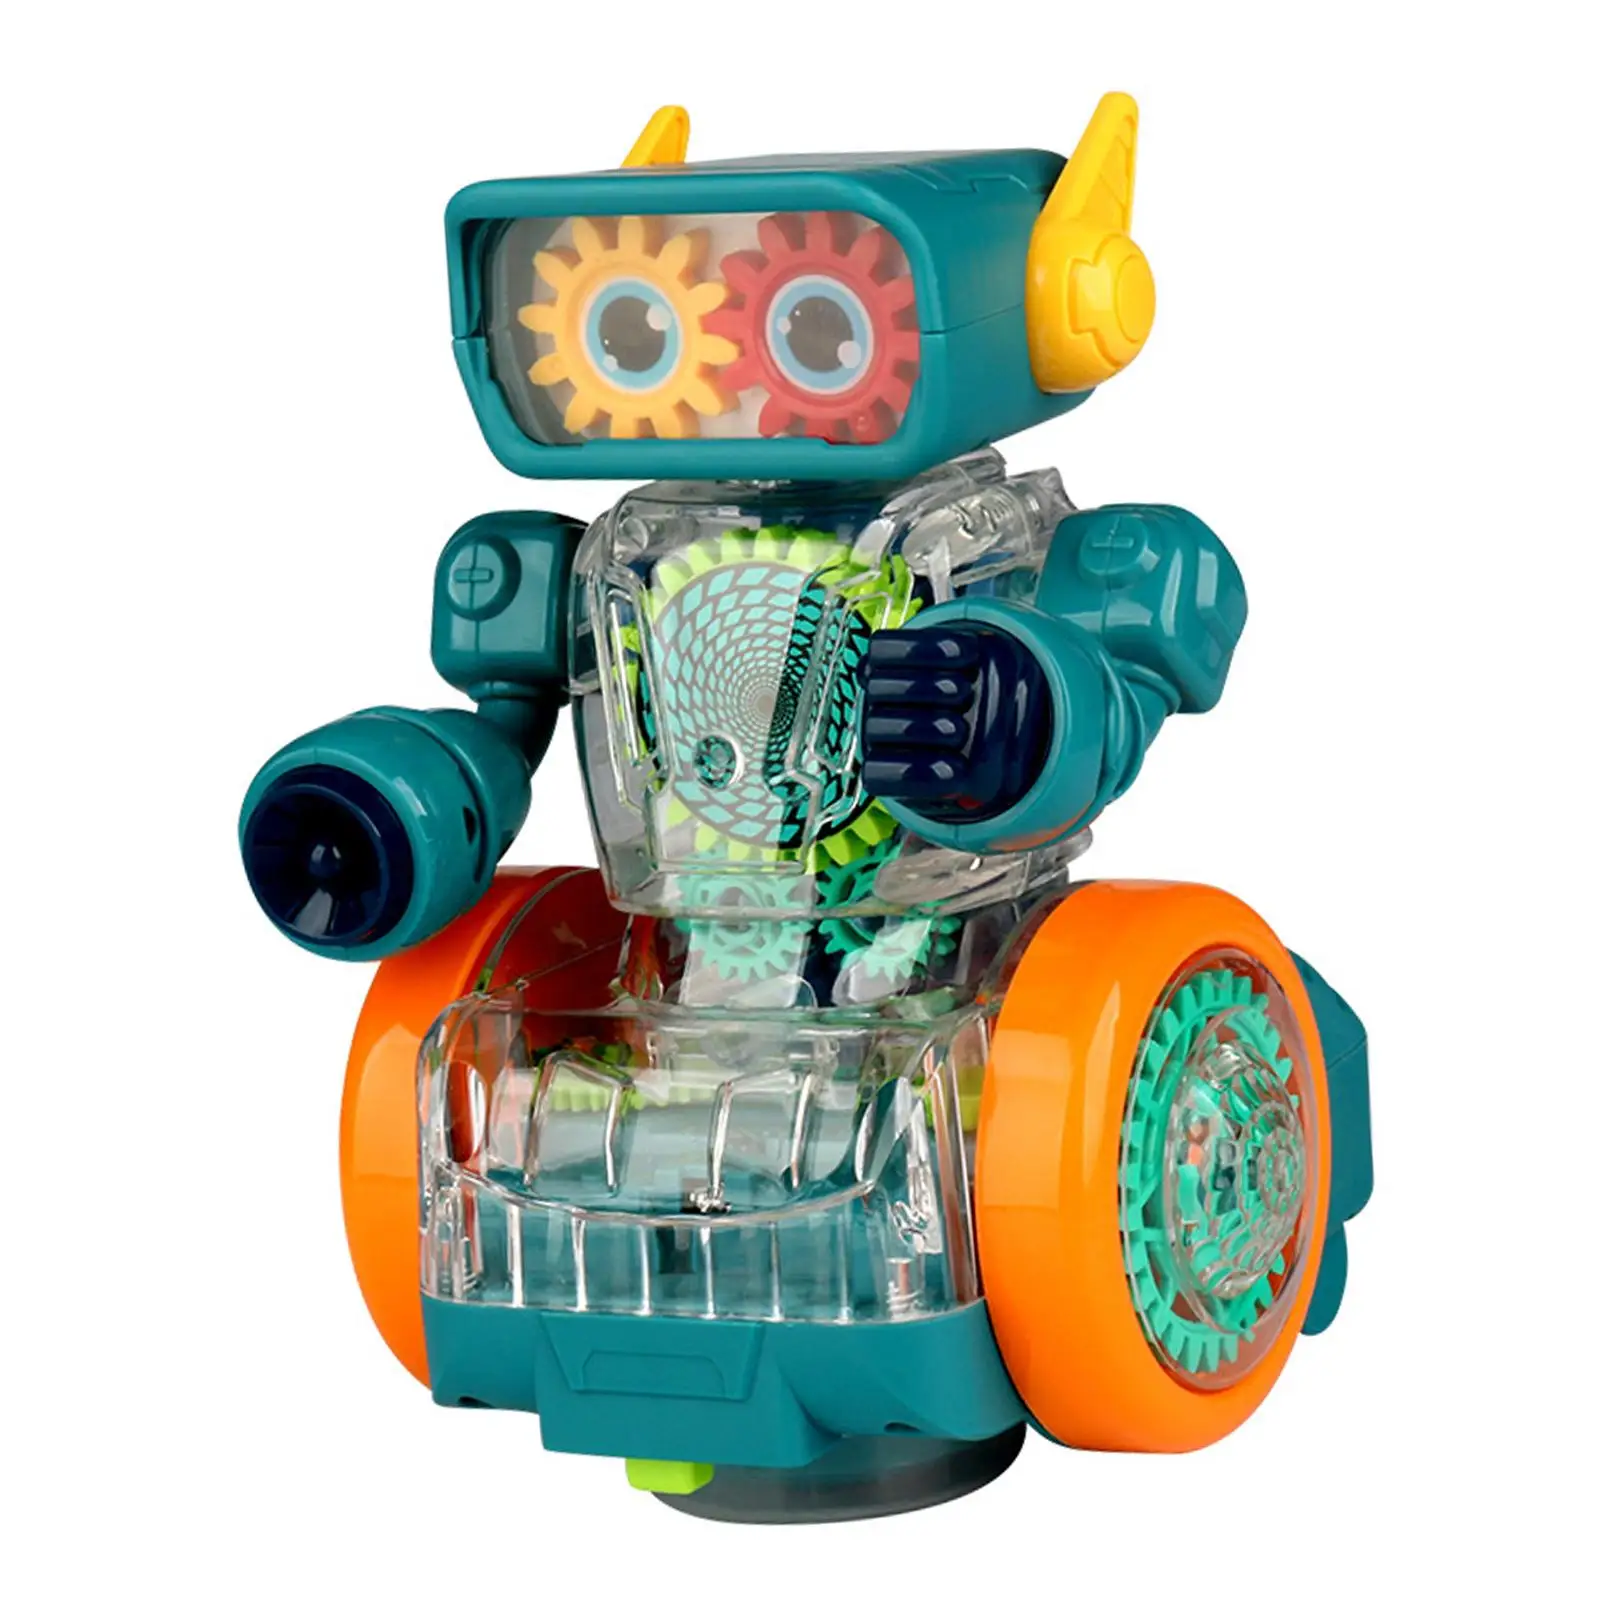 Electric Mechanical Gear Robot Toy with Lighting Fine Motor Skills Gear Toy for Children Girls Toddlers Kids Boys